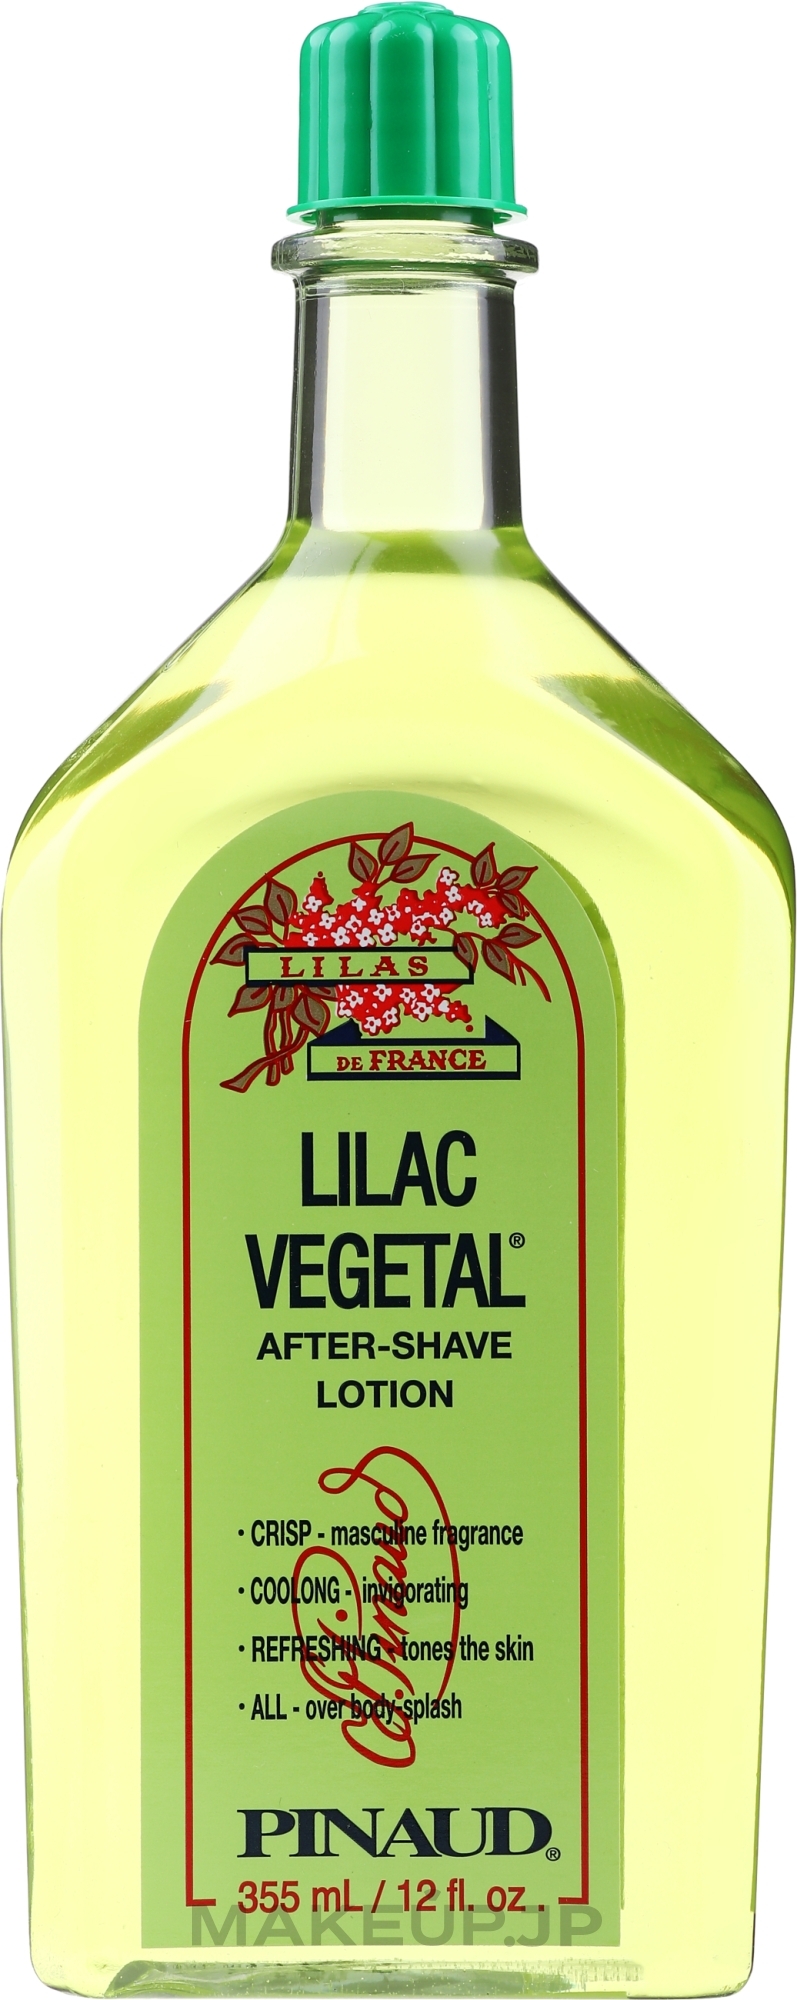 Clubman Pinaud Lilac Vegetal After Shave Lotion | Makeup.jp